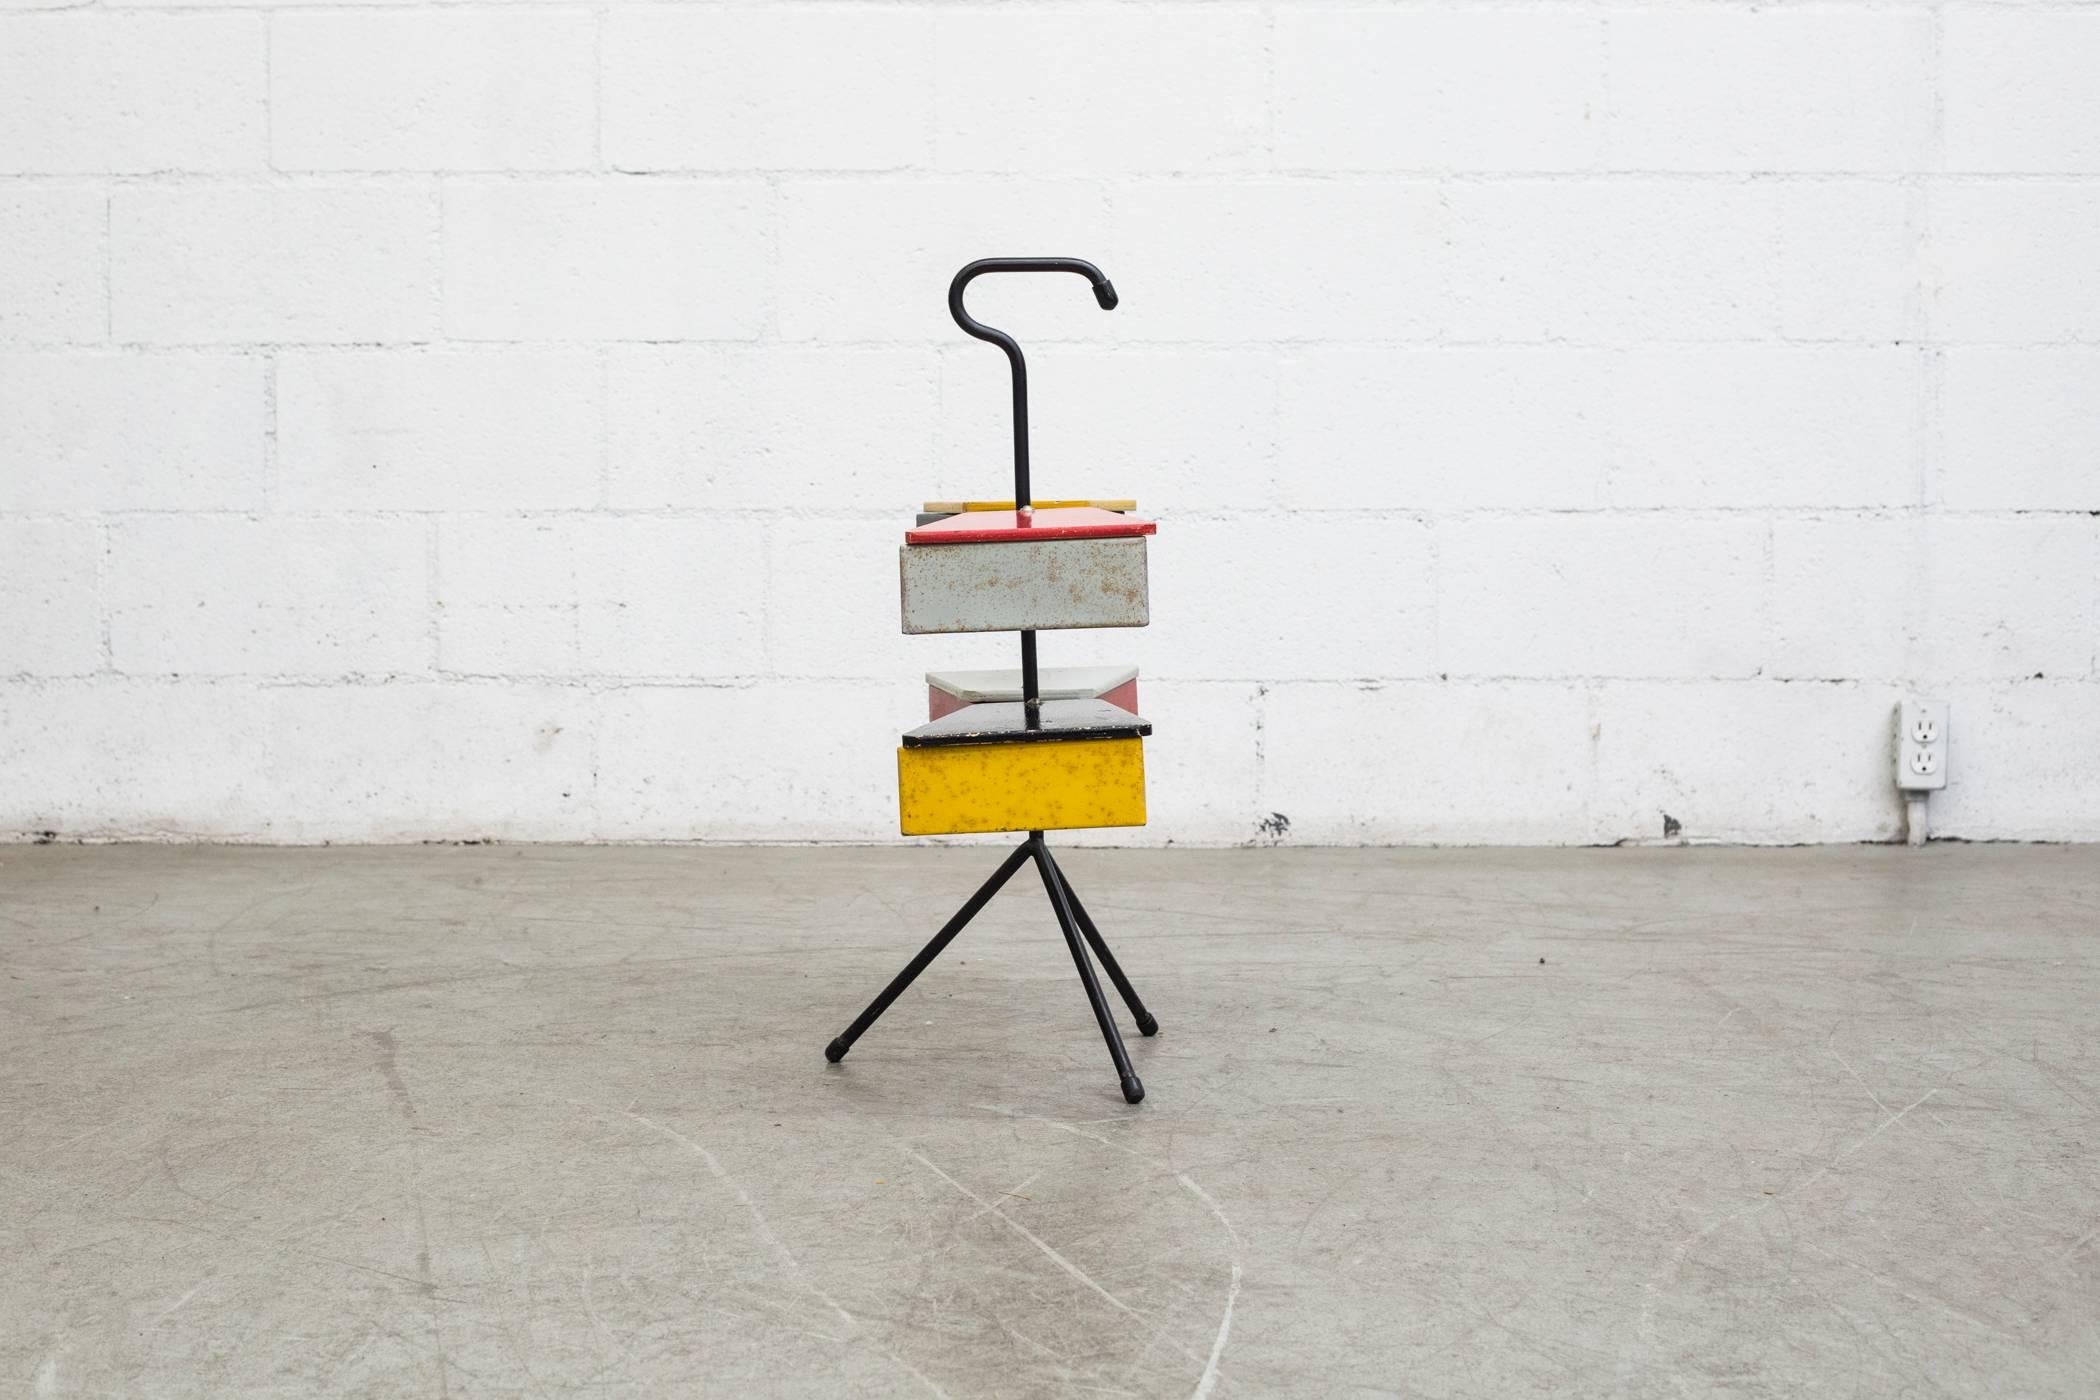 Colorful Rietveld style 1950s sewing stand by Joos Teders for Metalux, black metal tripod stand, with chrome accents and colored metal boxes with colored plywood lids. Boxes and lids swivel around the metal stand. in original condition, with visible